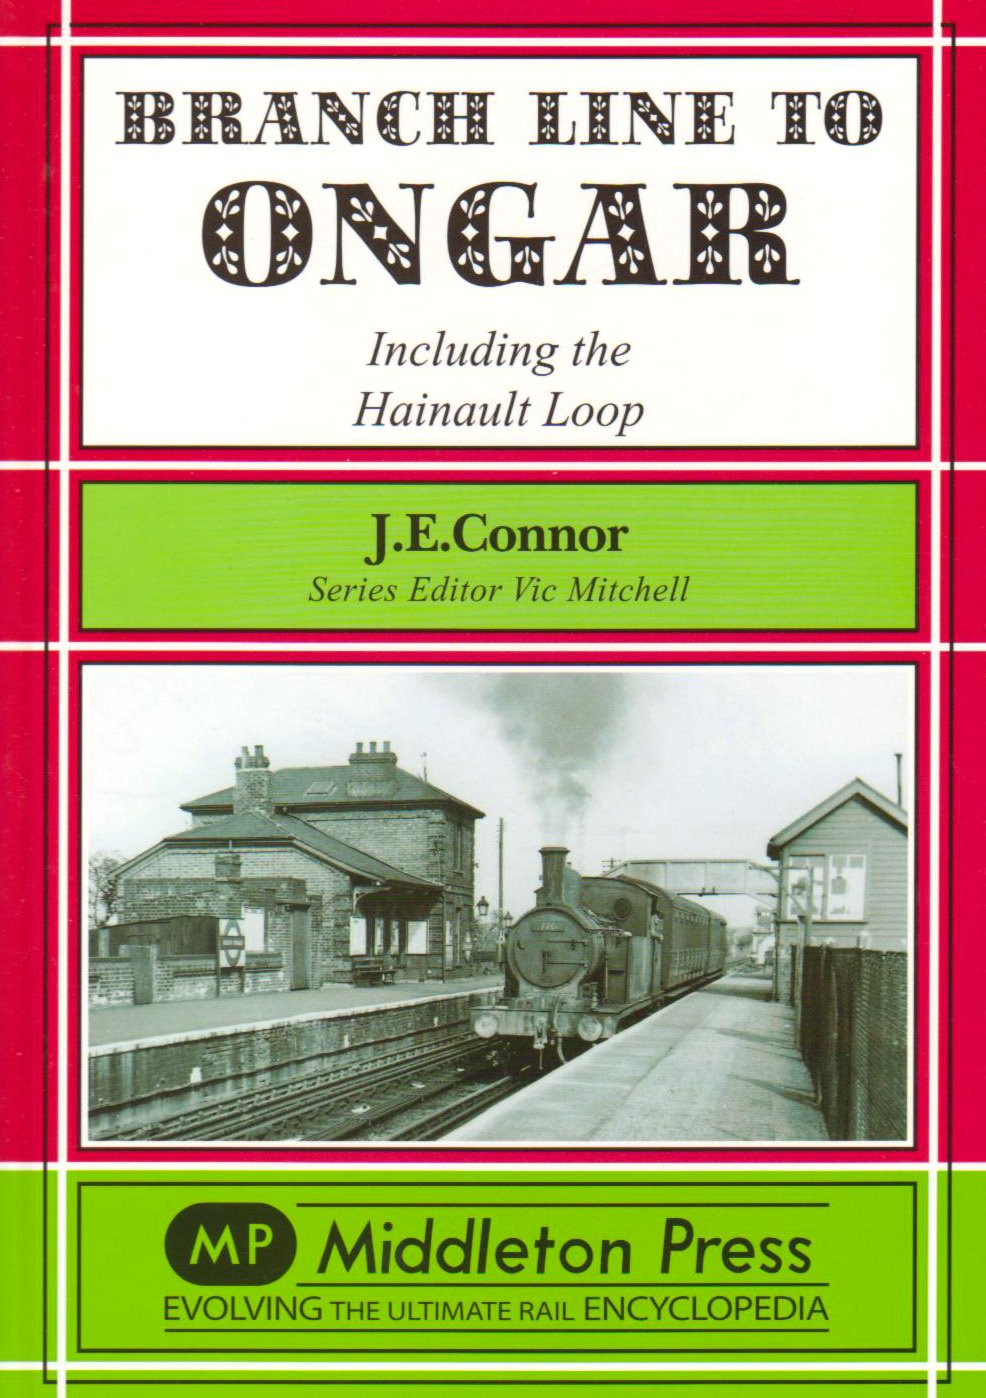 Branch Line to Ongar including the Hainault Loop